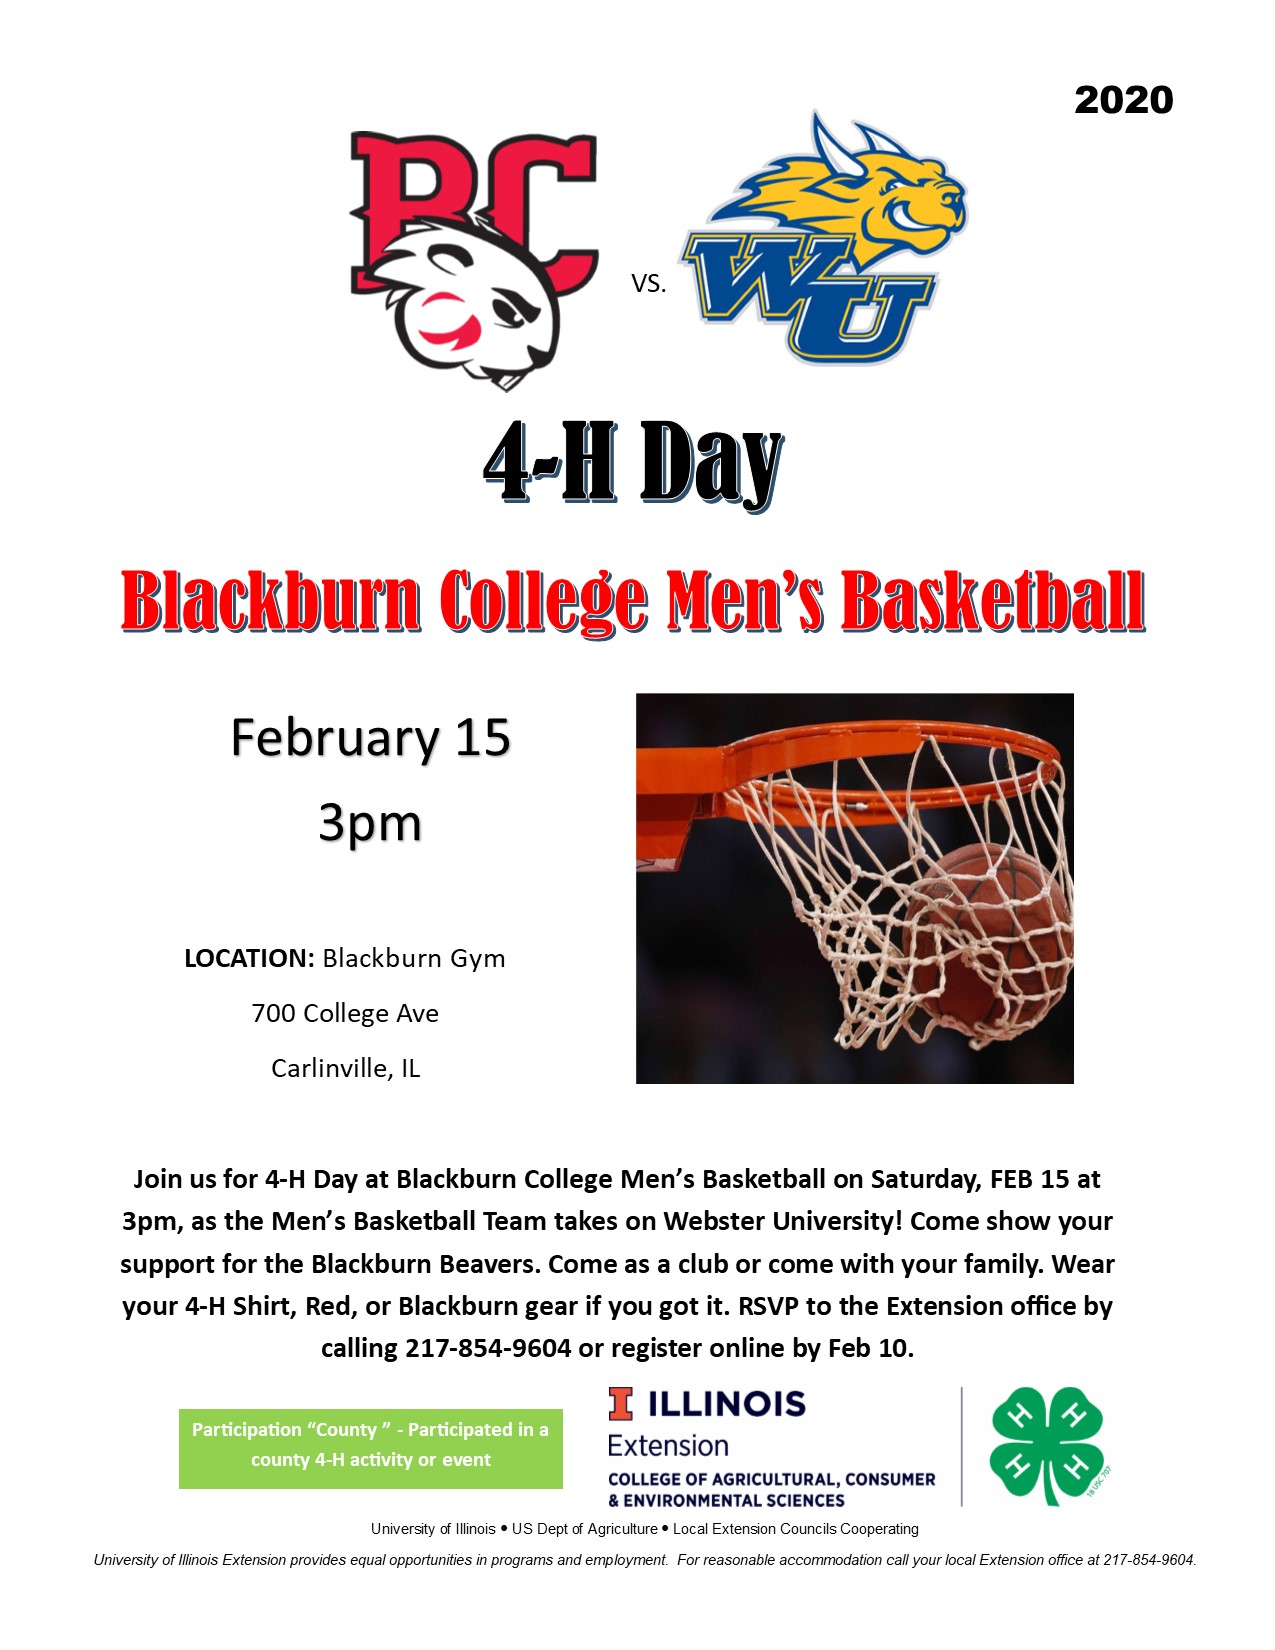 4 H Game Day At Blackburn College Carlinville University Of Illinois Extension